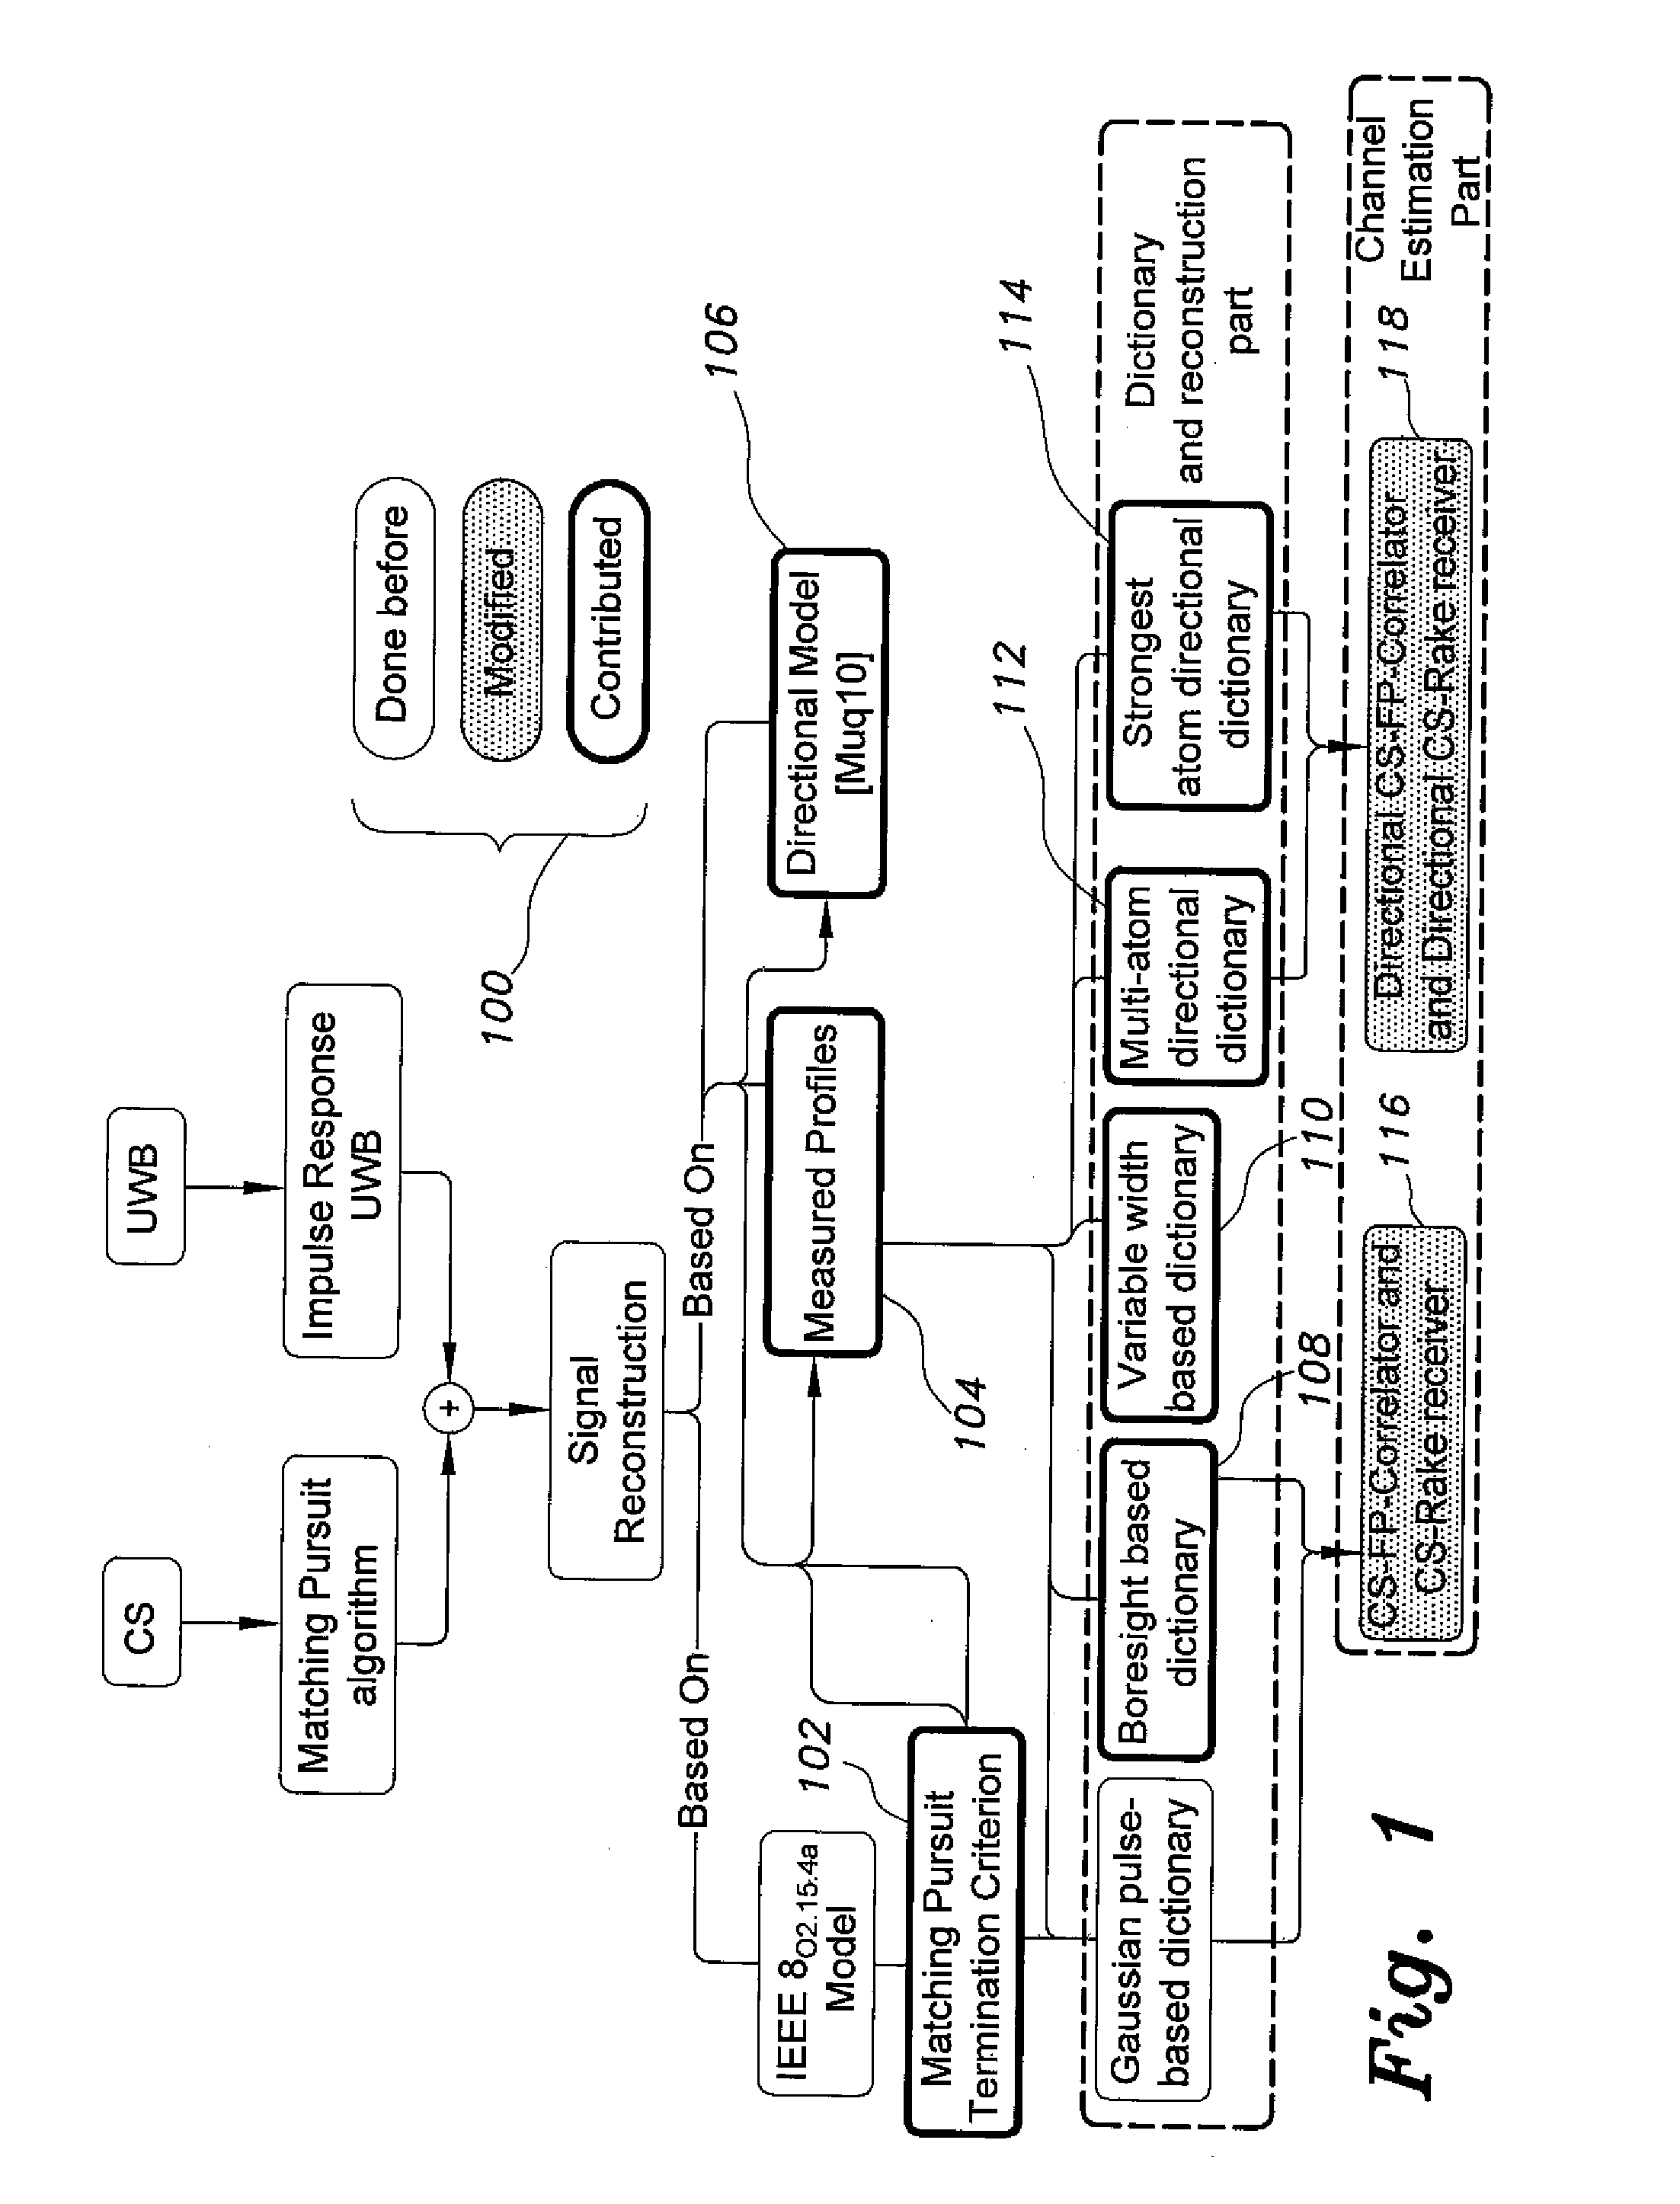 Method for compressive sensing , reconstruction, and estimation of ultra-wideband channels